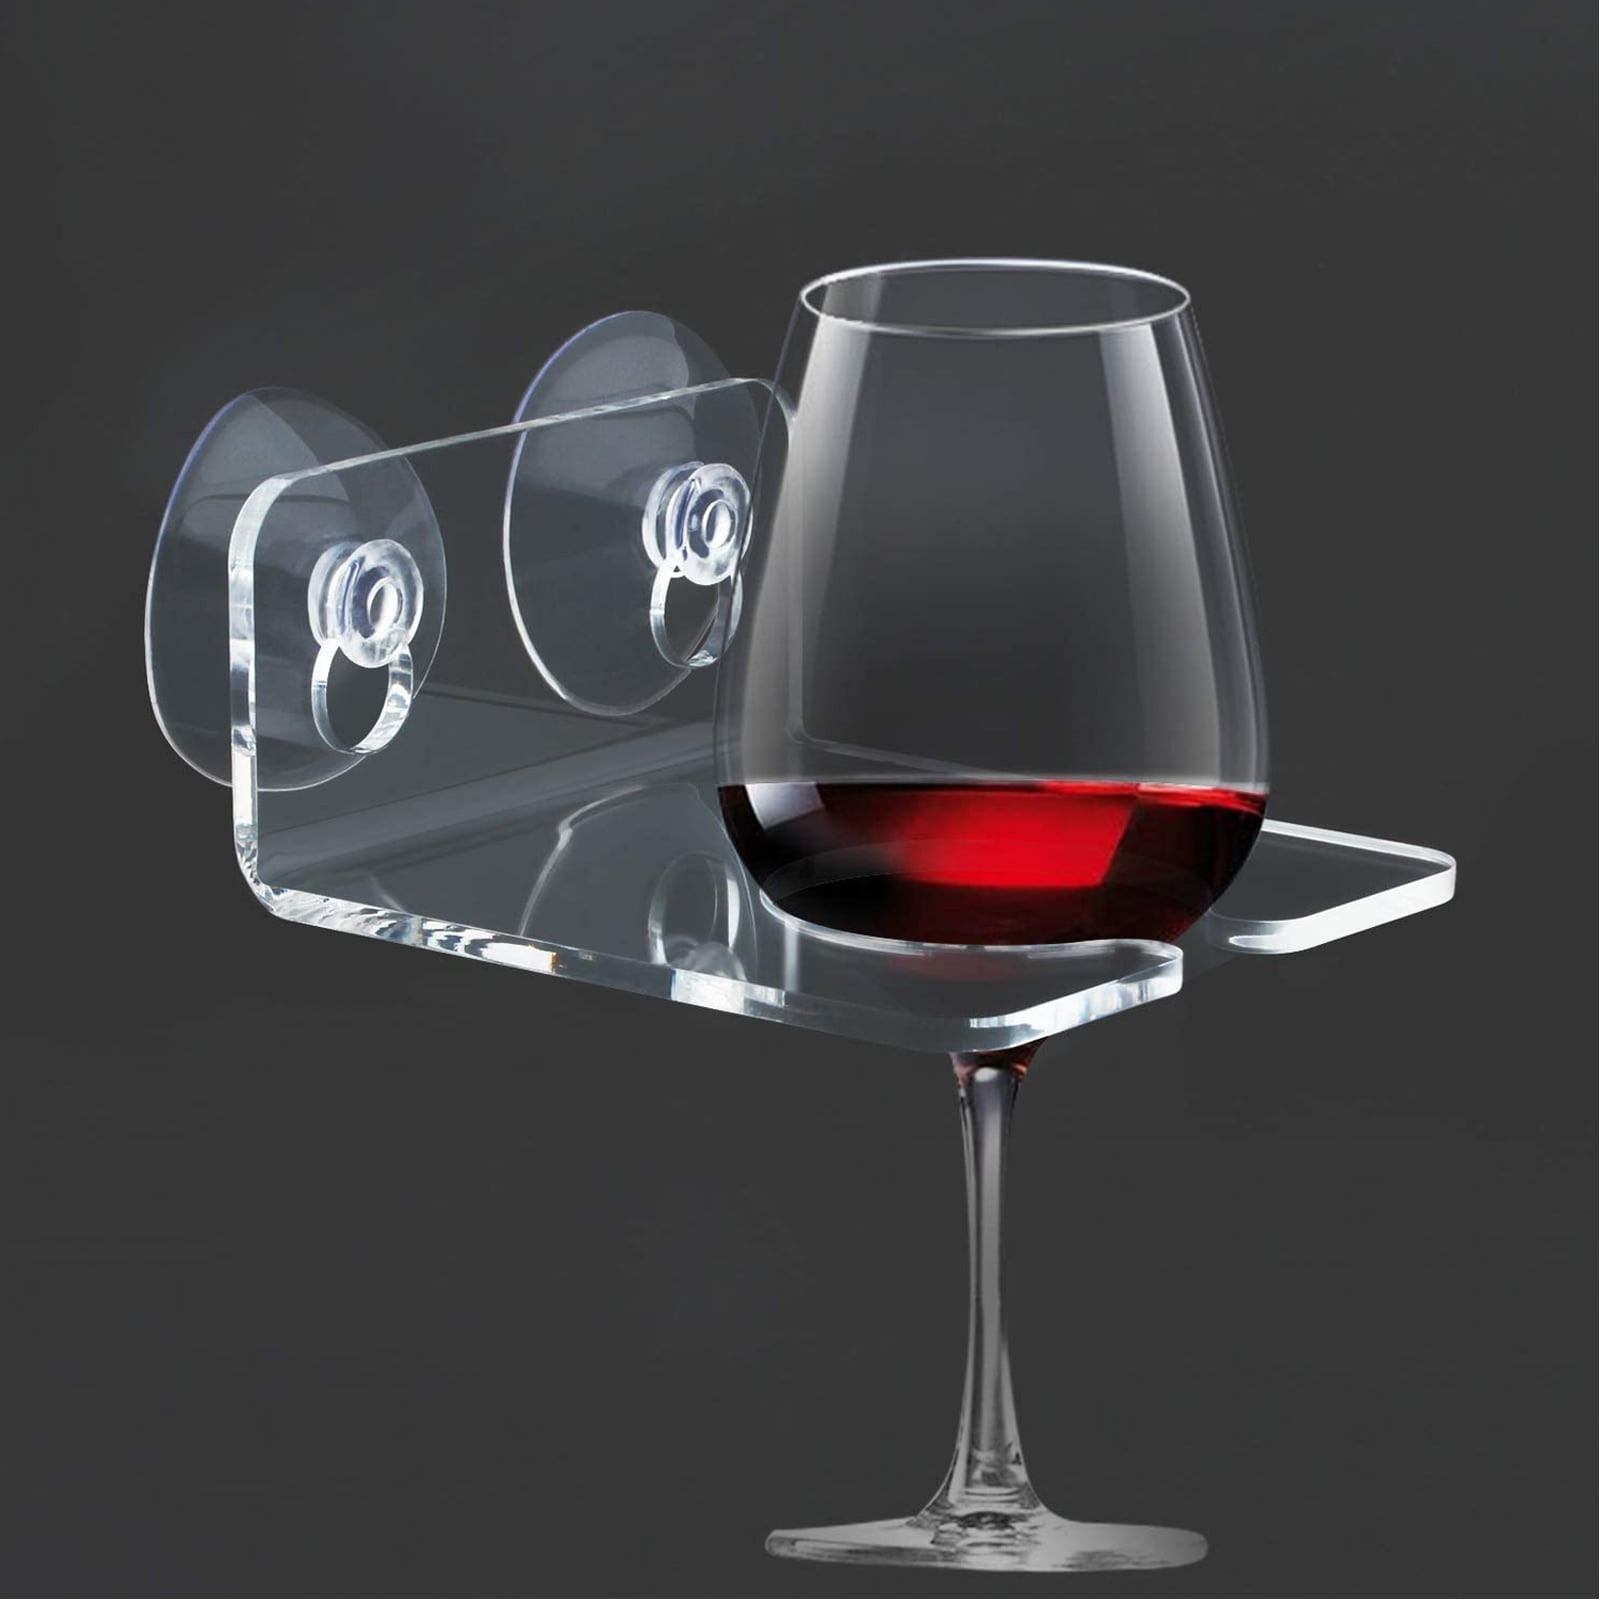 Tub Wine Glass Cup Holder, Shower And Cup Holder For Wine, Relaxation Wine  Gift For Christmas-crystal Clear Acrylic